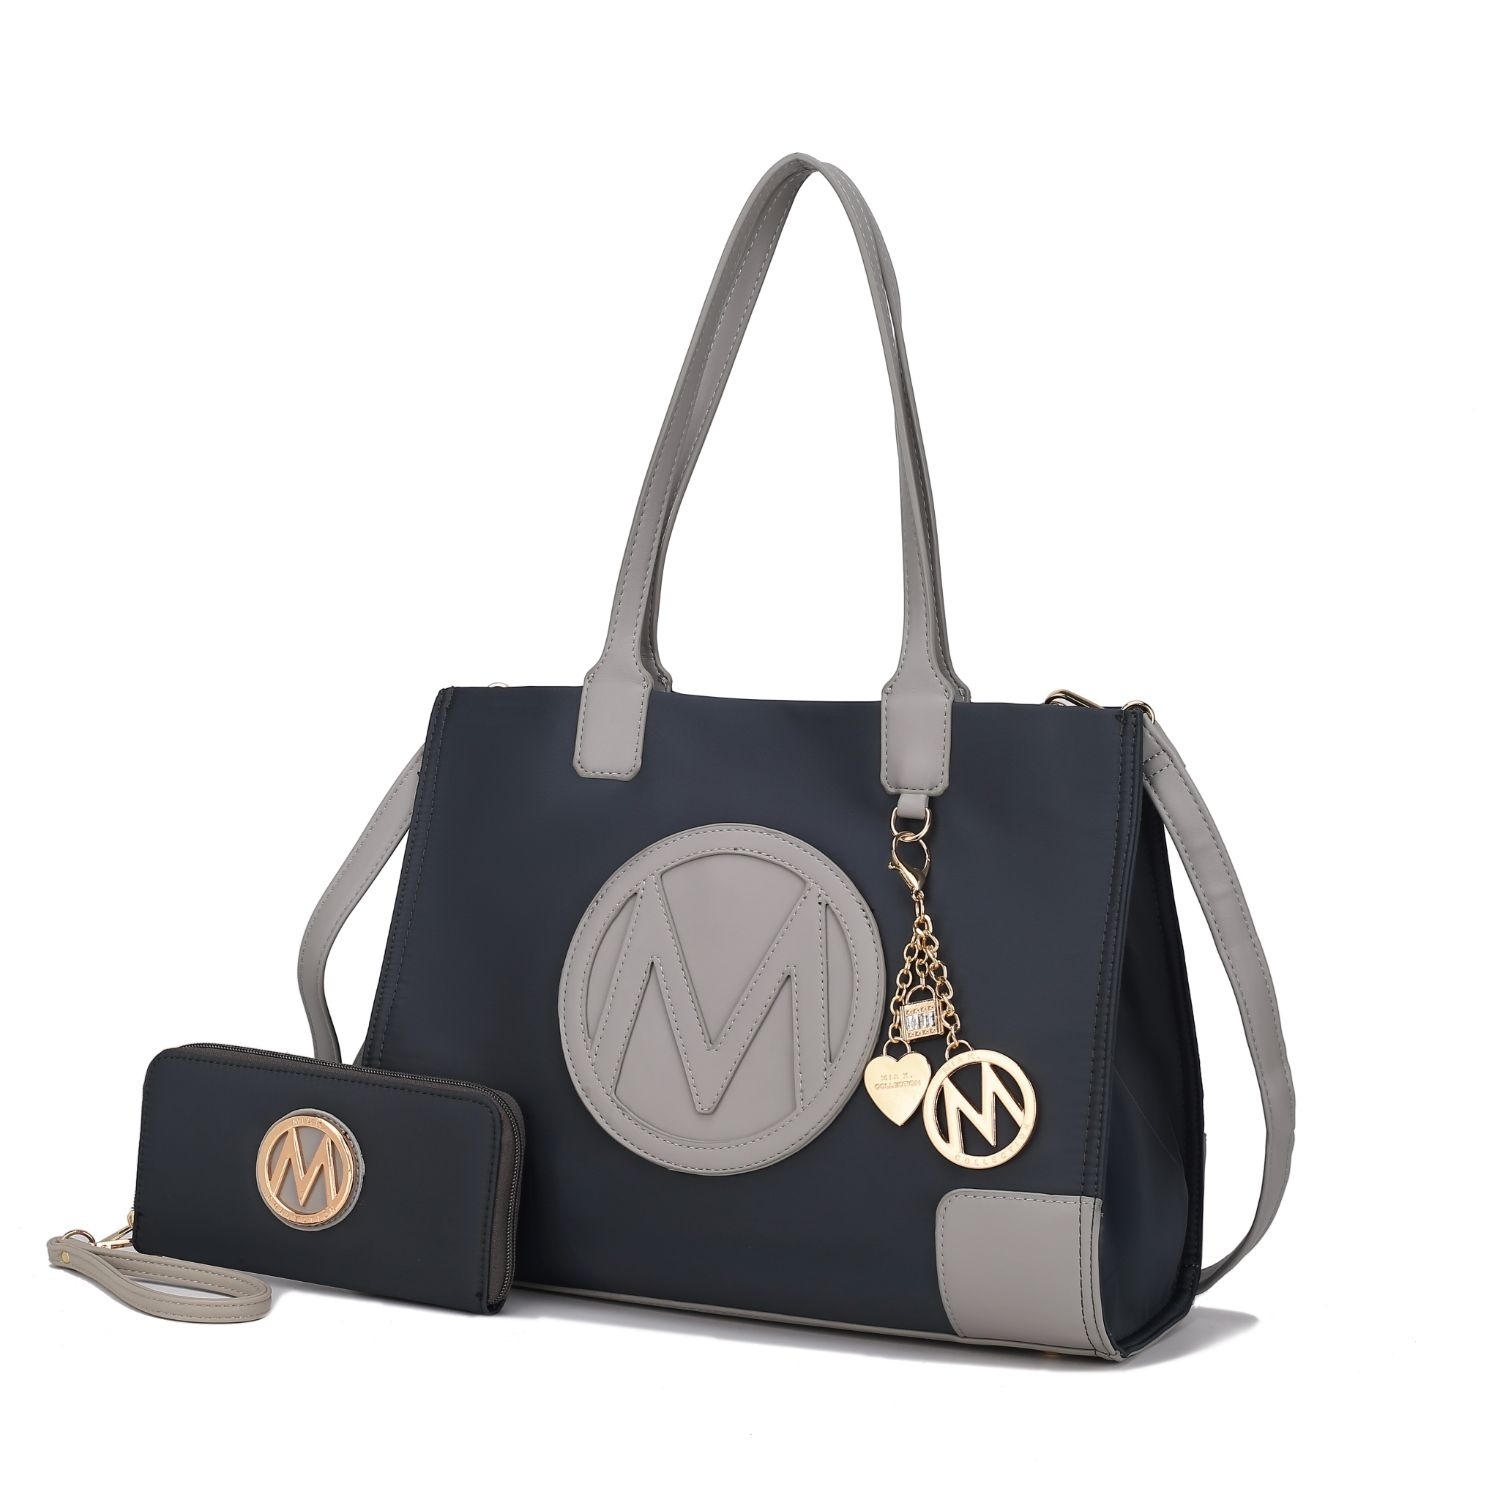 MKF Collection Louise Tote Handbag And Wallet Set By Mia K. - Charcoal Light Gray